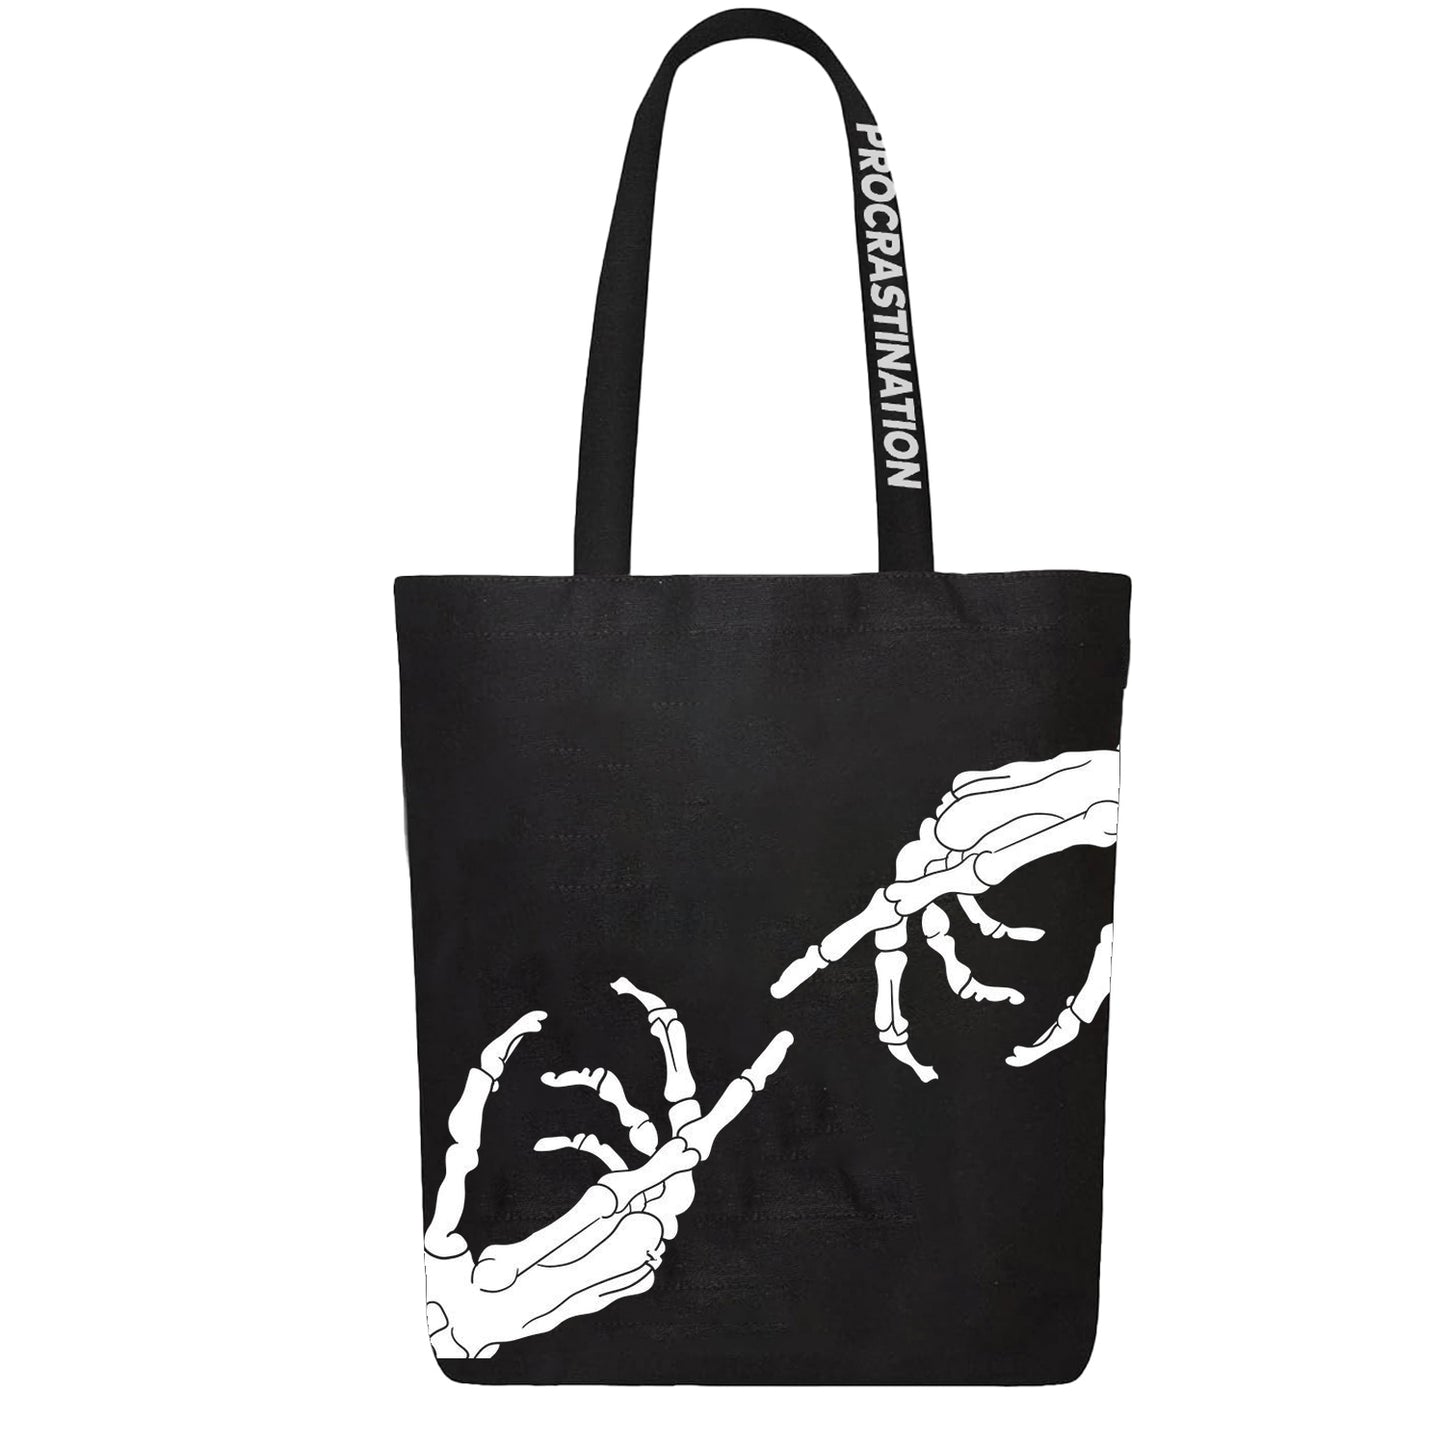 The Creation Tote Bag